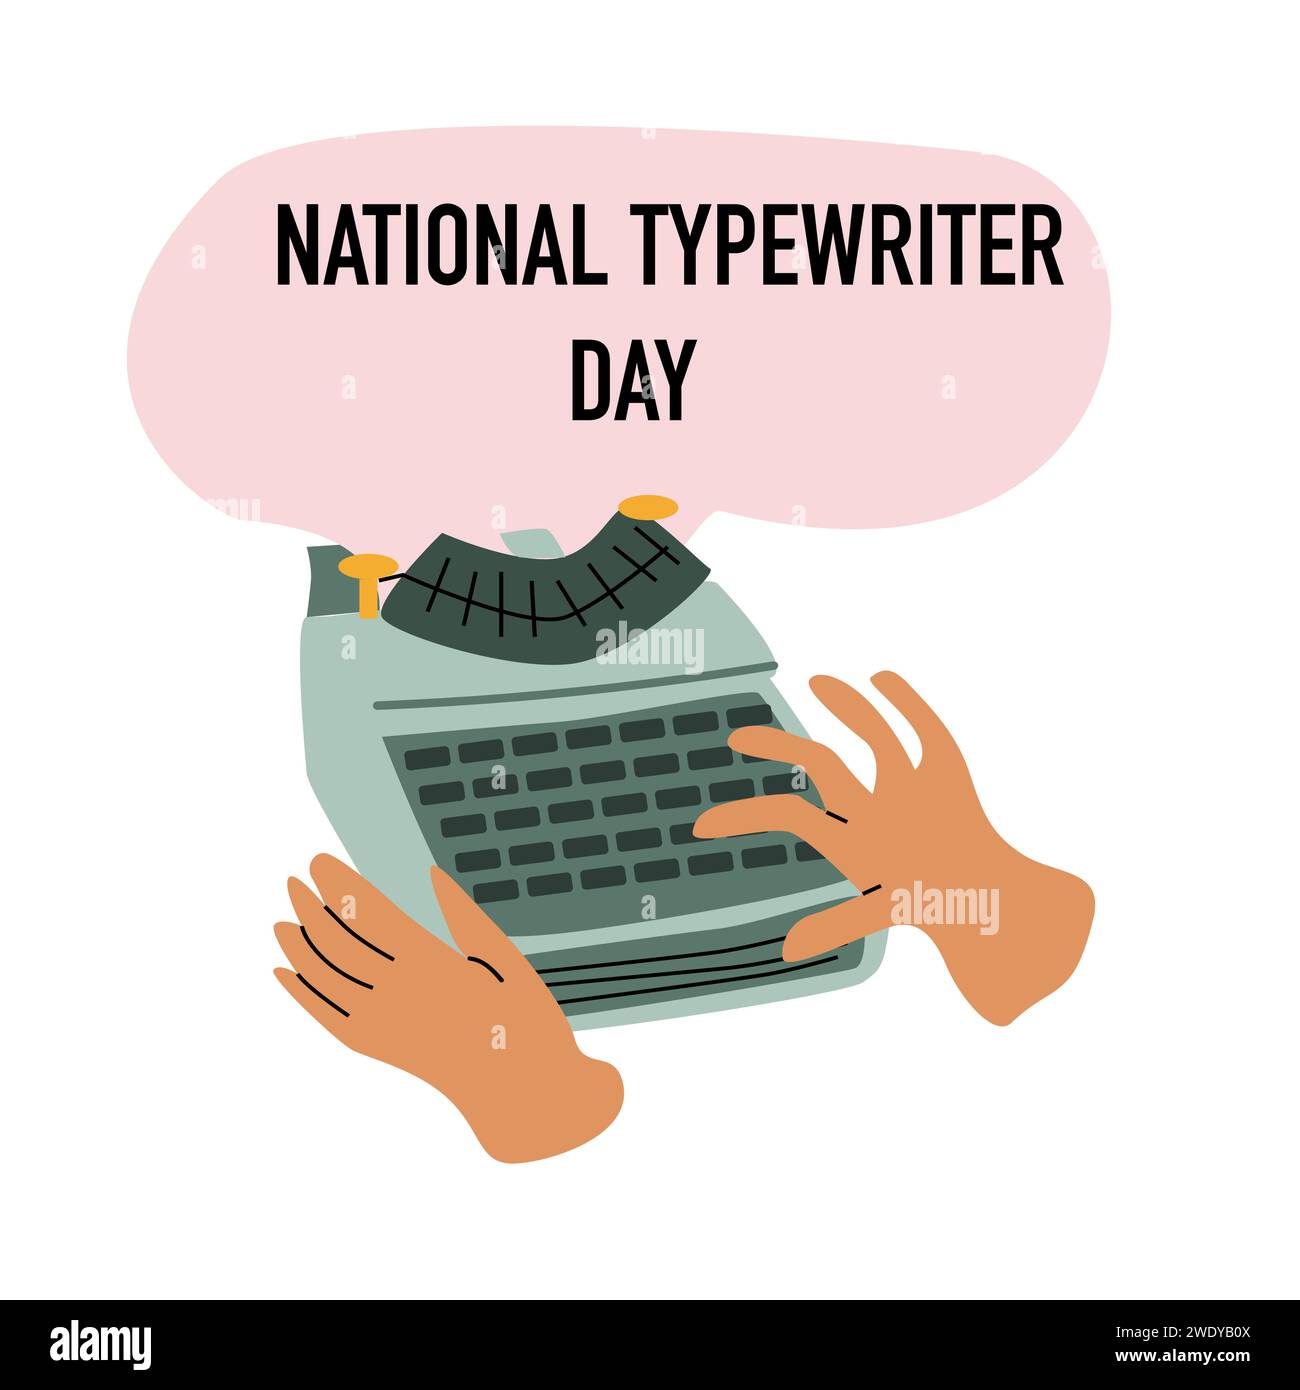 human hand writing on typewrite, national typewriter day banner. Vector illustration isolated.  Stock Vector